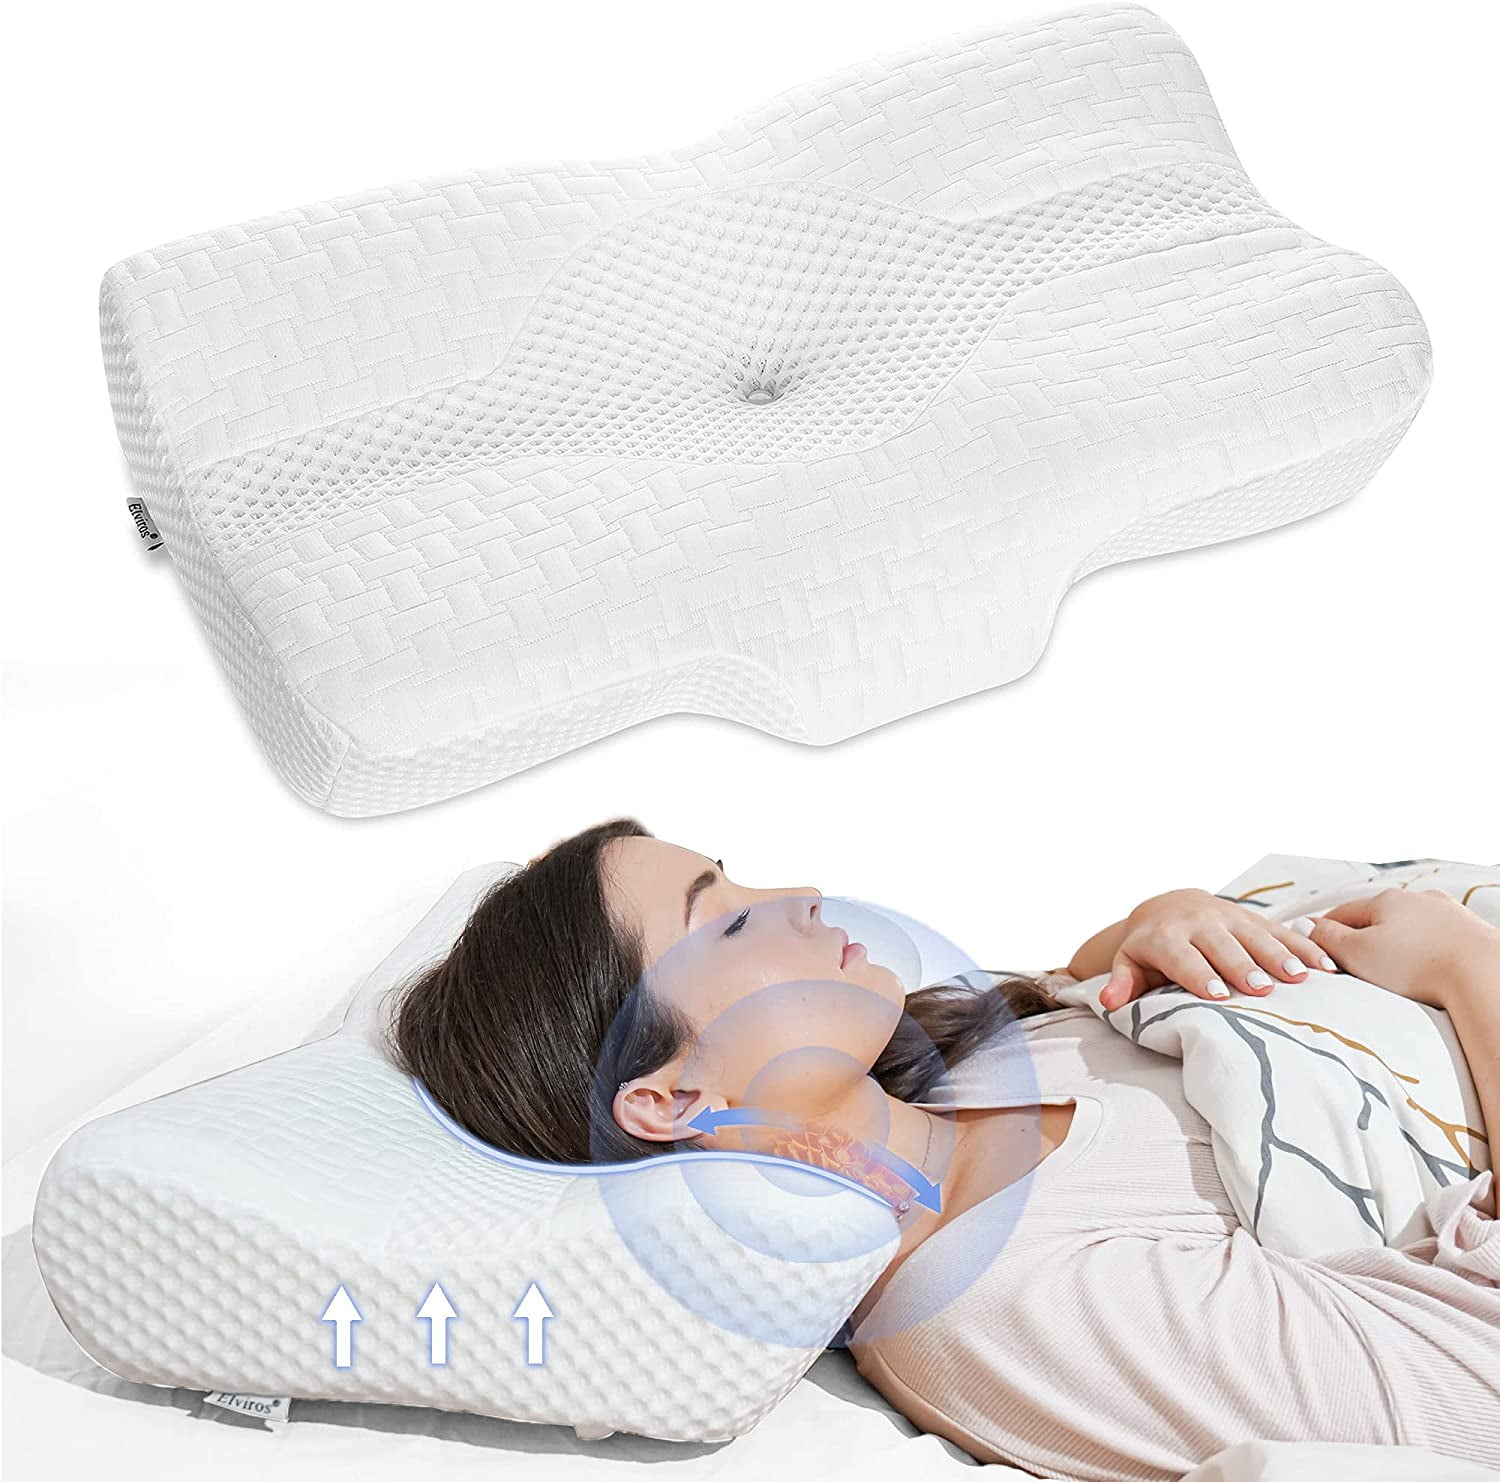 Contoured Orthopedic Memory Foam Pillow for Neck and Shoulder Pain Relief Support Cool Blue Foam Free Sleeping Mask Cervical Pillows for Side Ergonomic Back Stomach Sleepers – Premium Bedding